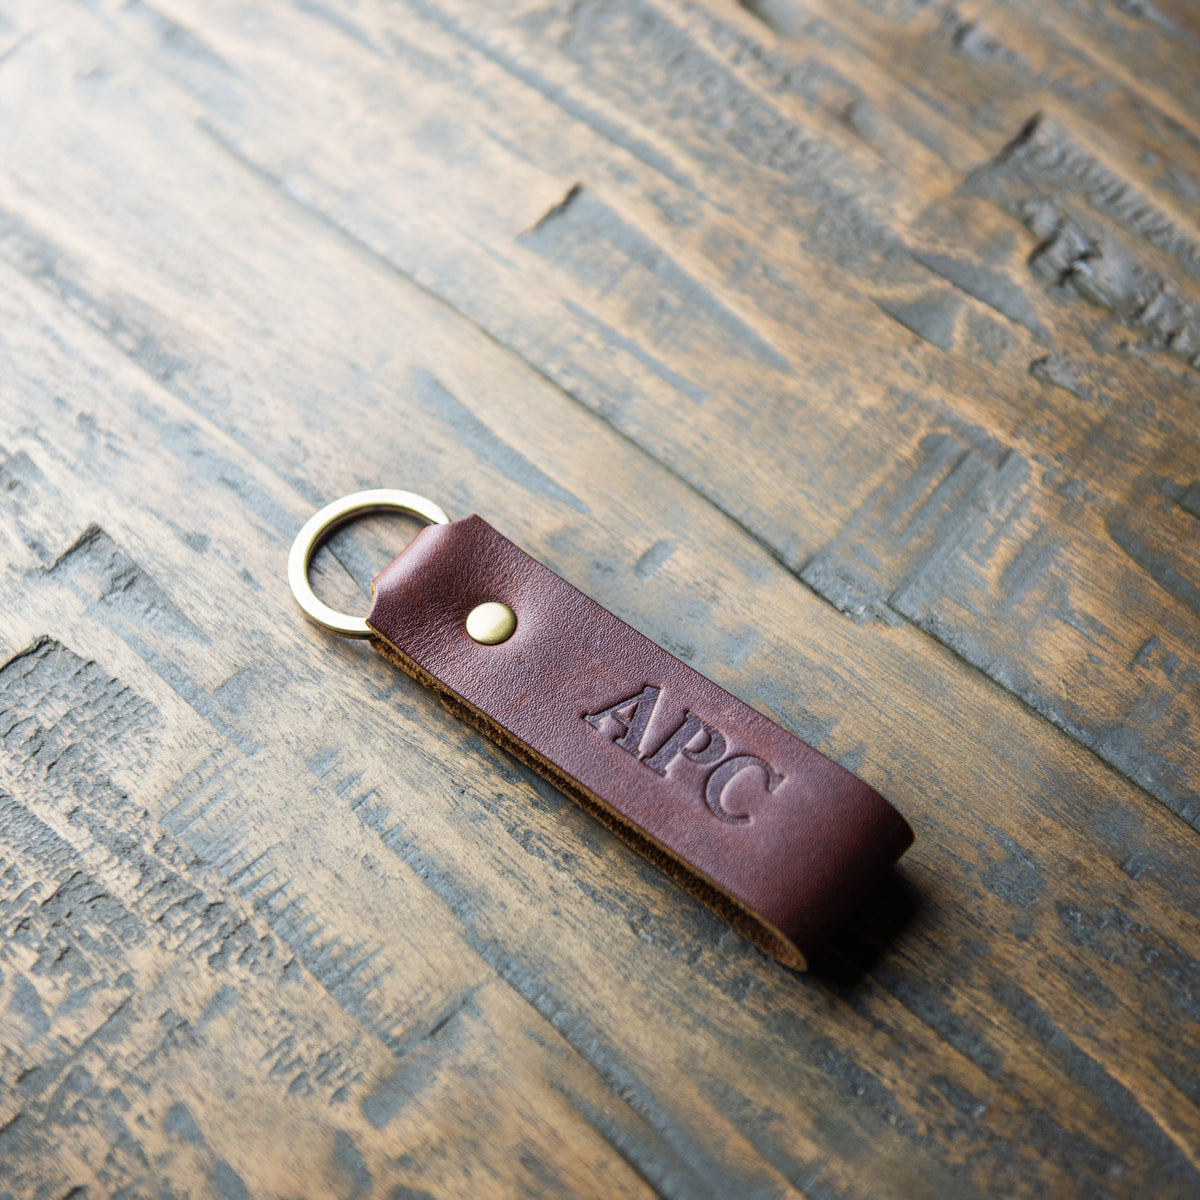 Choose Your Favorite Leather Key Ring